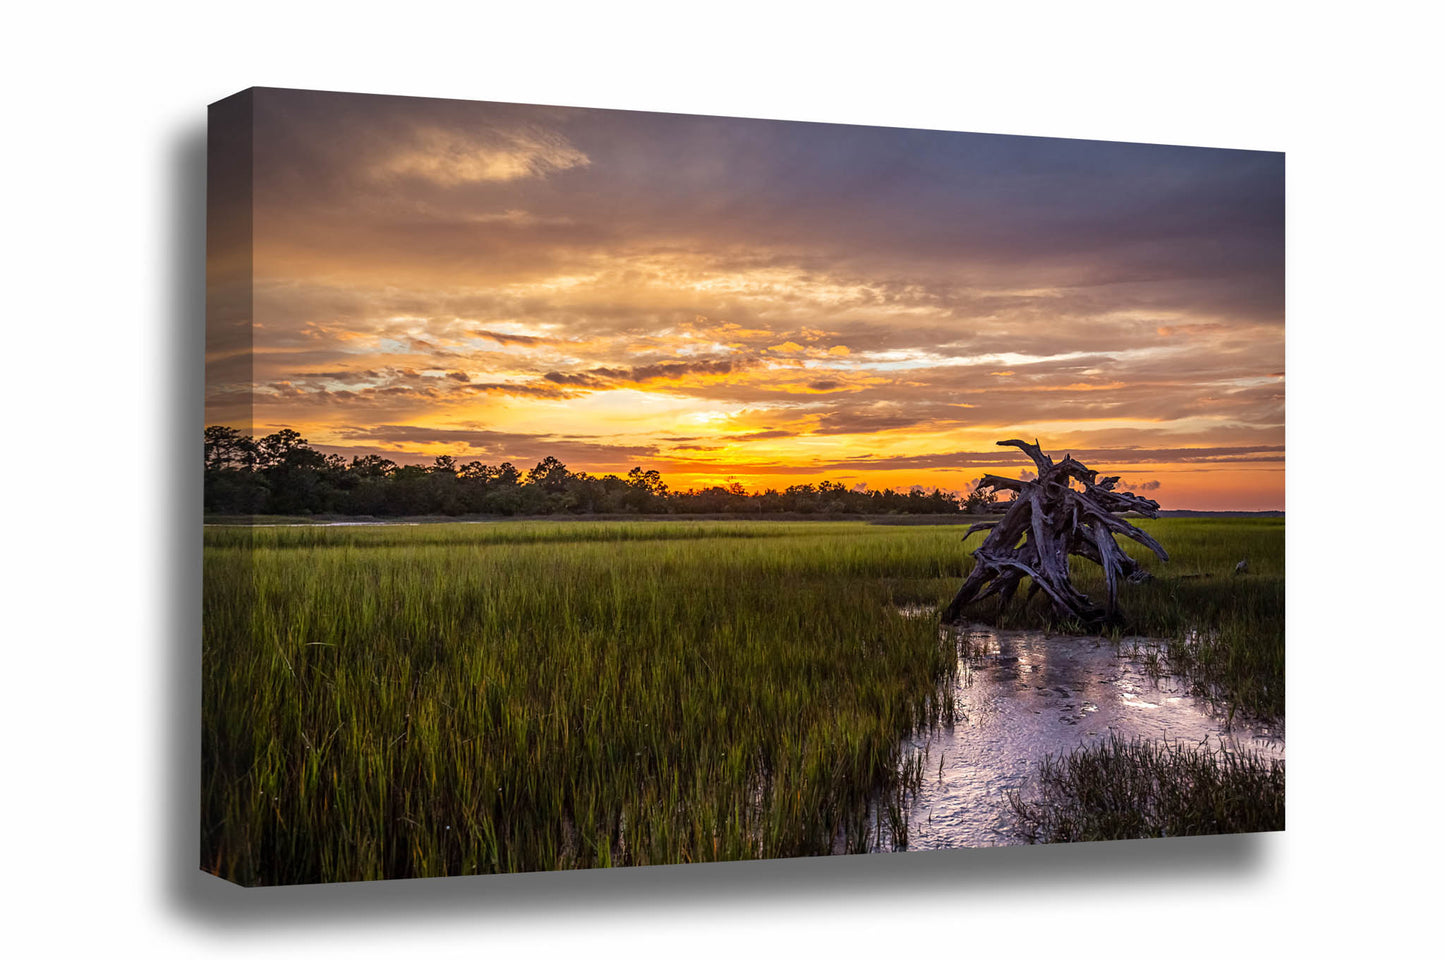 Lowcountry canvas wall art of a dead tree in a salt marsh as a scenic sunset takes place on Pinckney Island, South Carolina by Sean Ramsey of Southern Plains Photography.